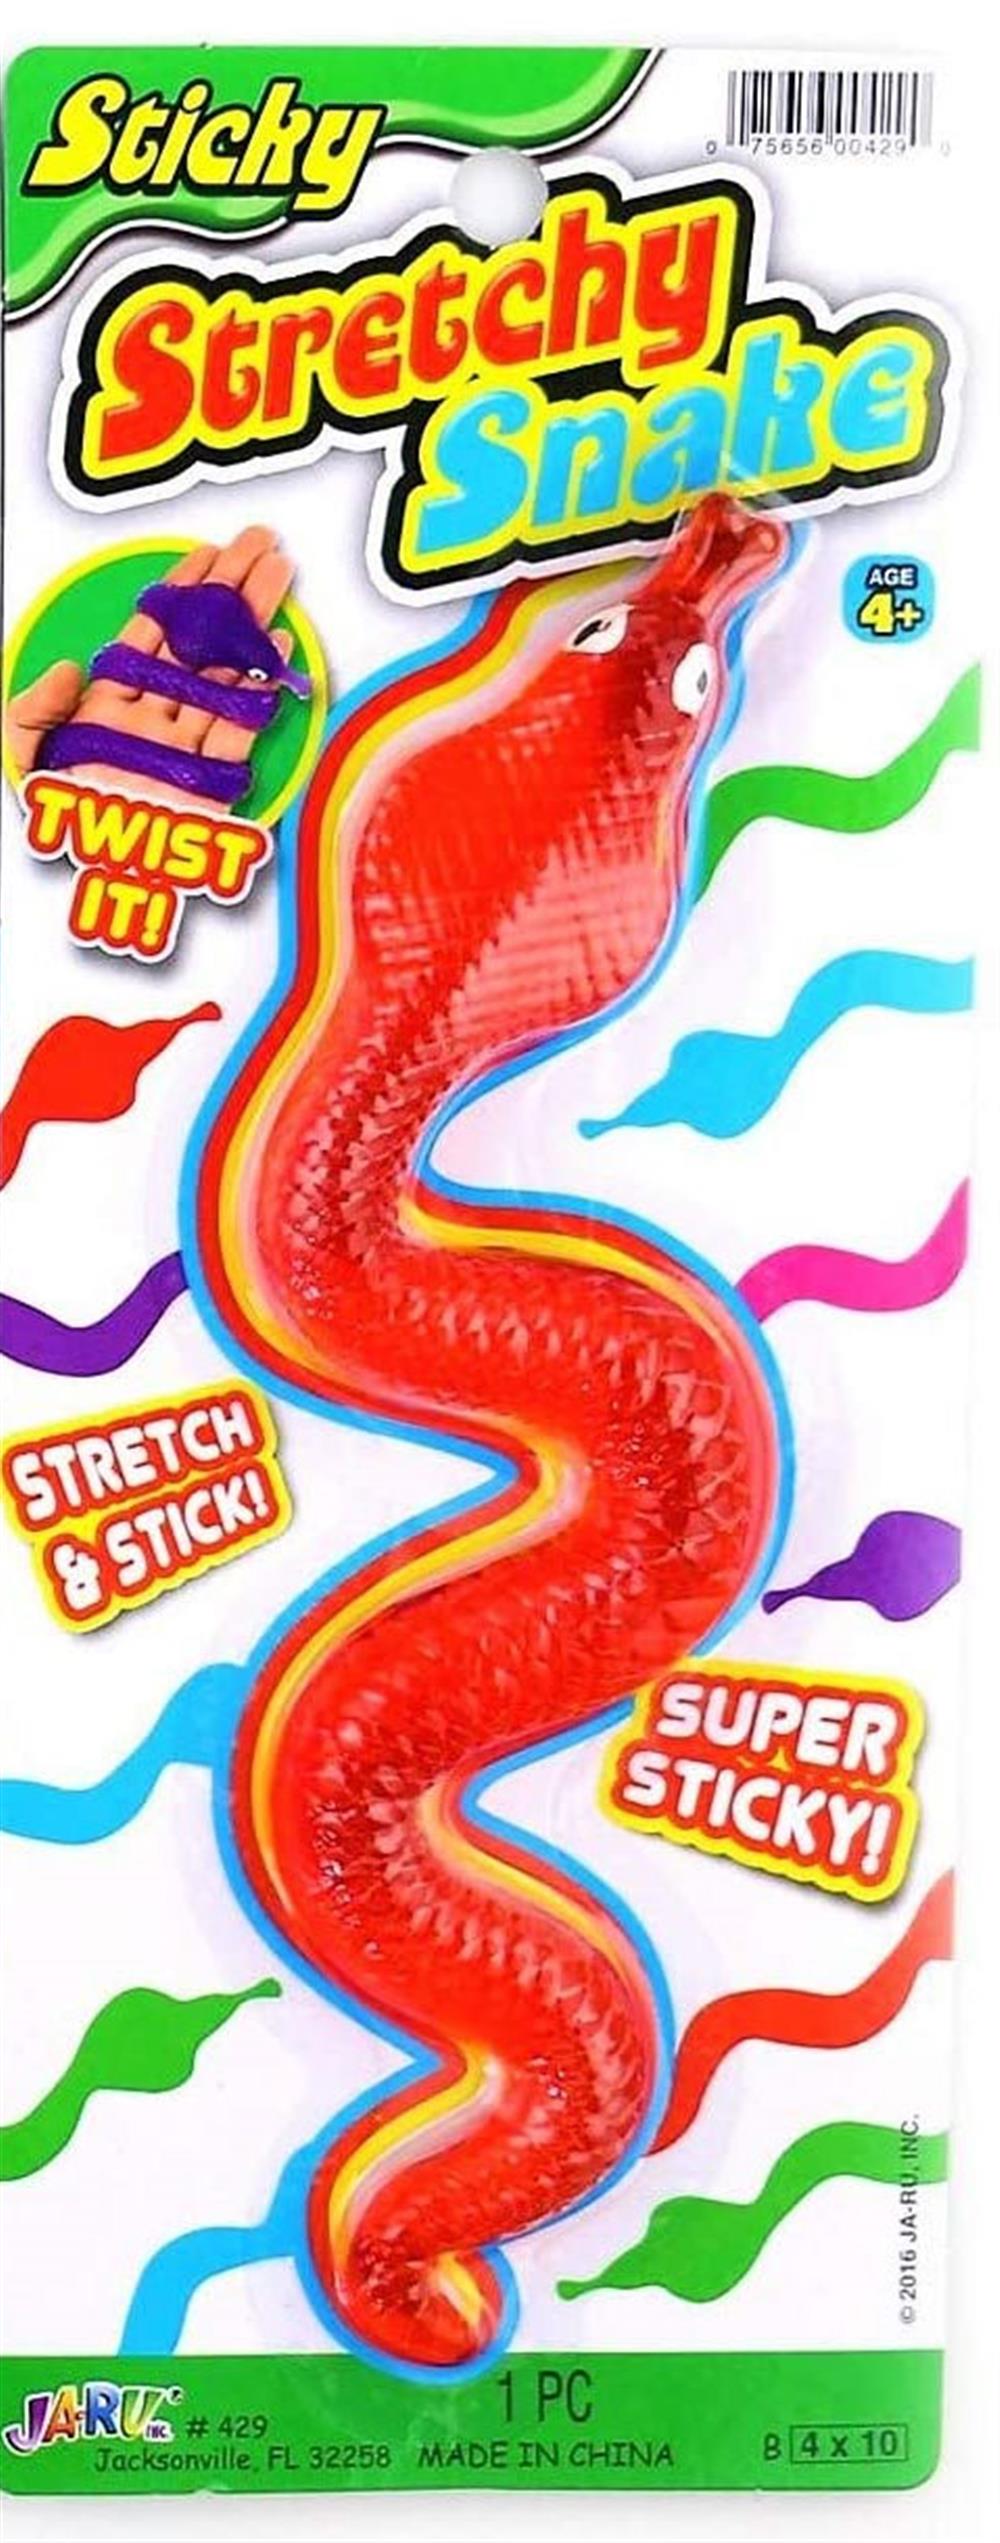 Stretchy Reptiles - Extreme Twisty Fun With A Slimy Feel - 3 Styles Available!